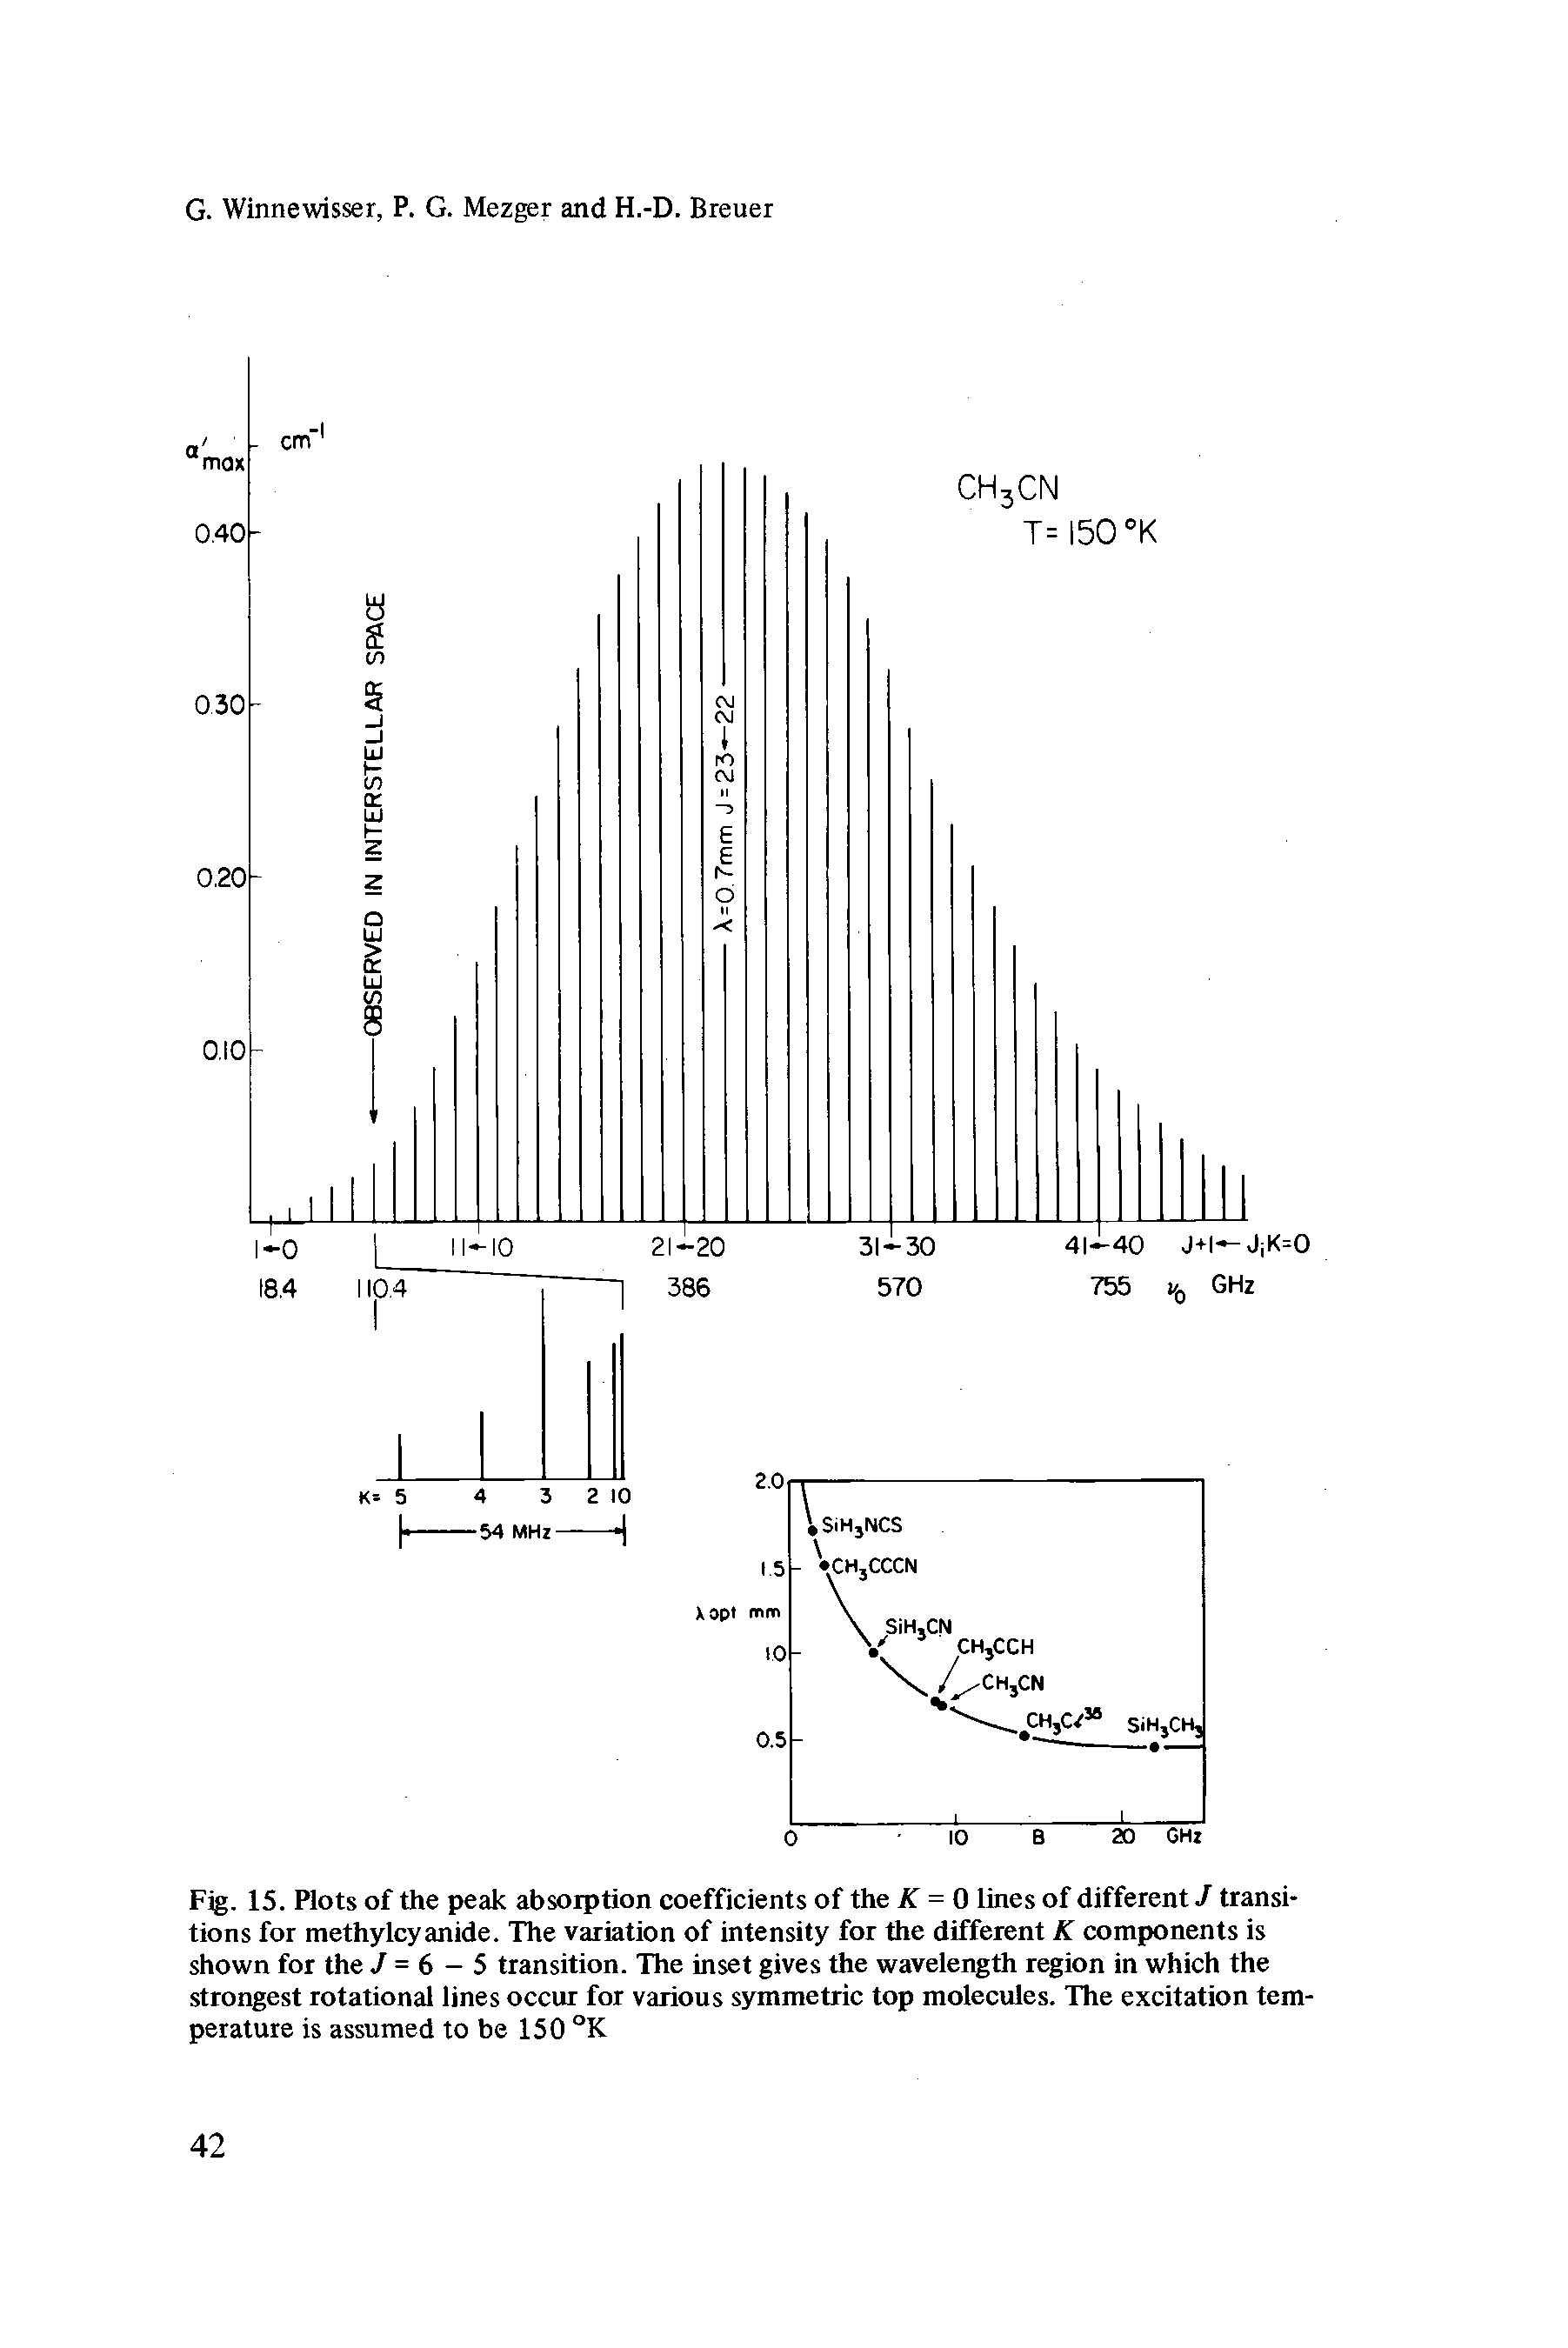 Fig. 15. Plots of the peak absorption coefficients of the K = 0 lines of different J transitions for methylcyanide. The variation of intensity for the different K components is shown for the 7=6-5 transition. The inset gives the wavelength region in which the strongest rotational lines occur for various symmetric top molecules. The excitation temperature is assumed to be 150 °K...